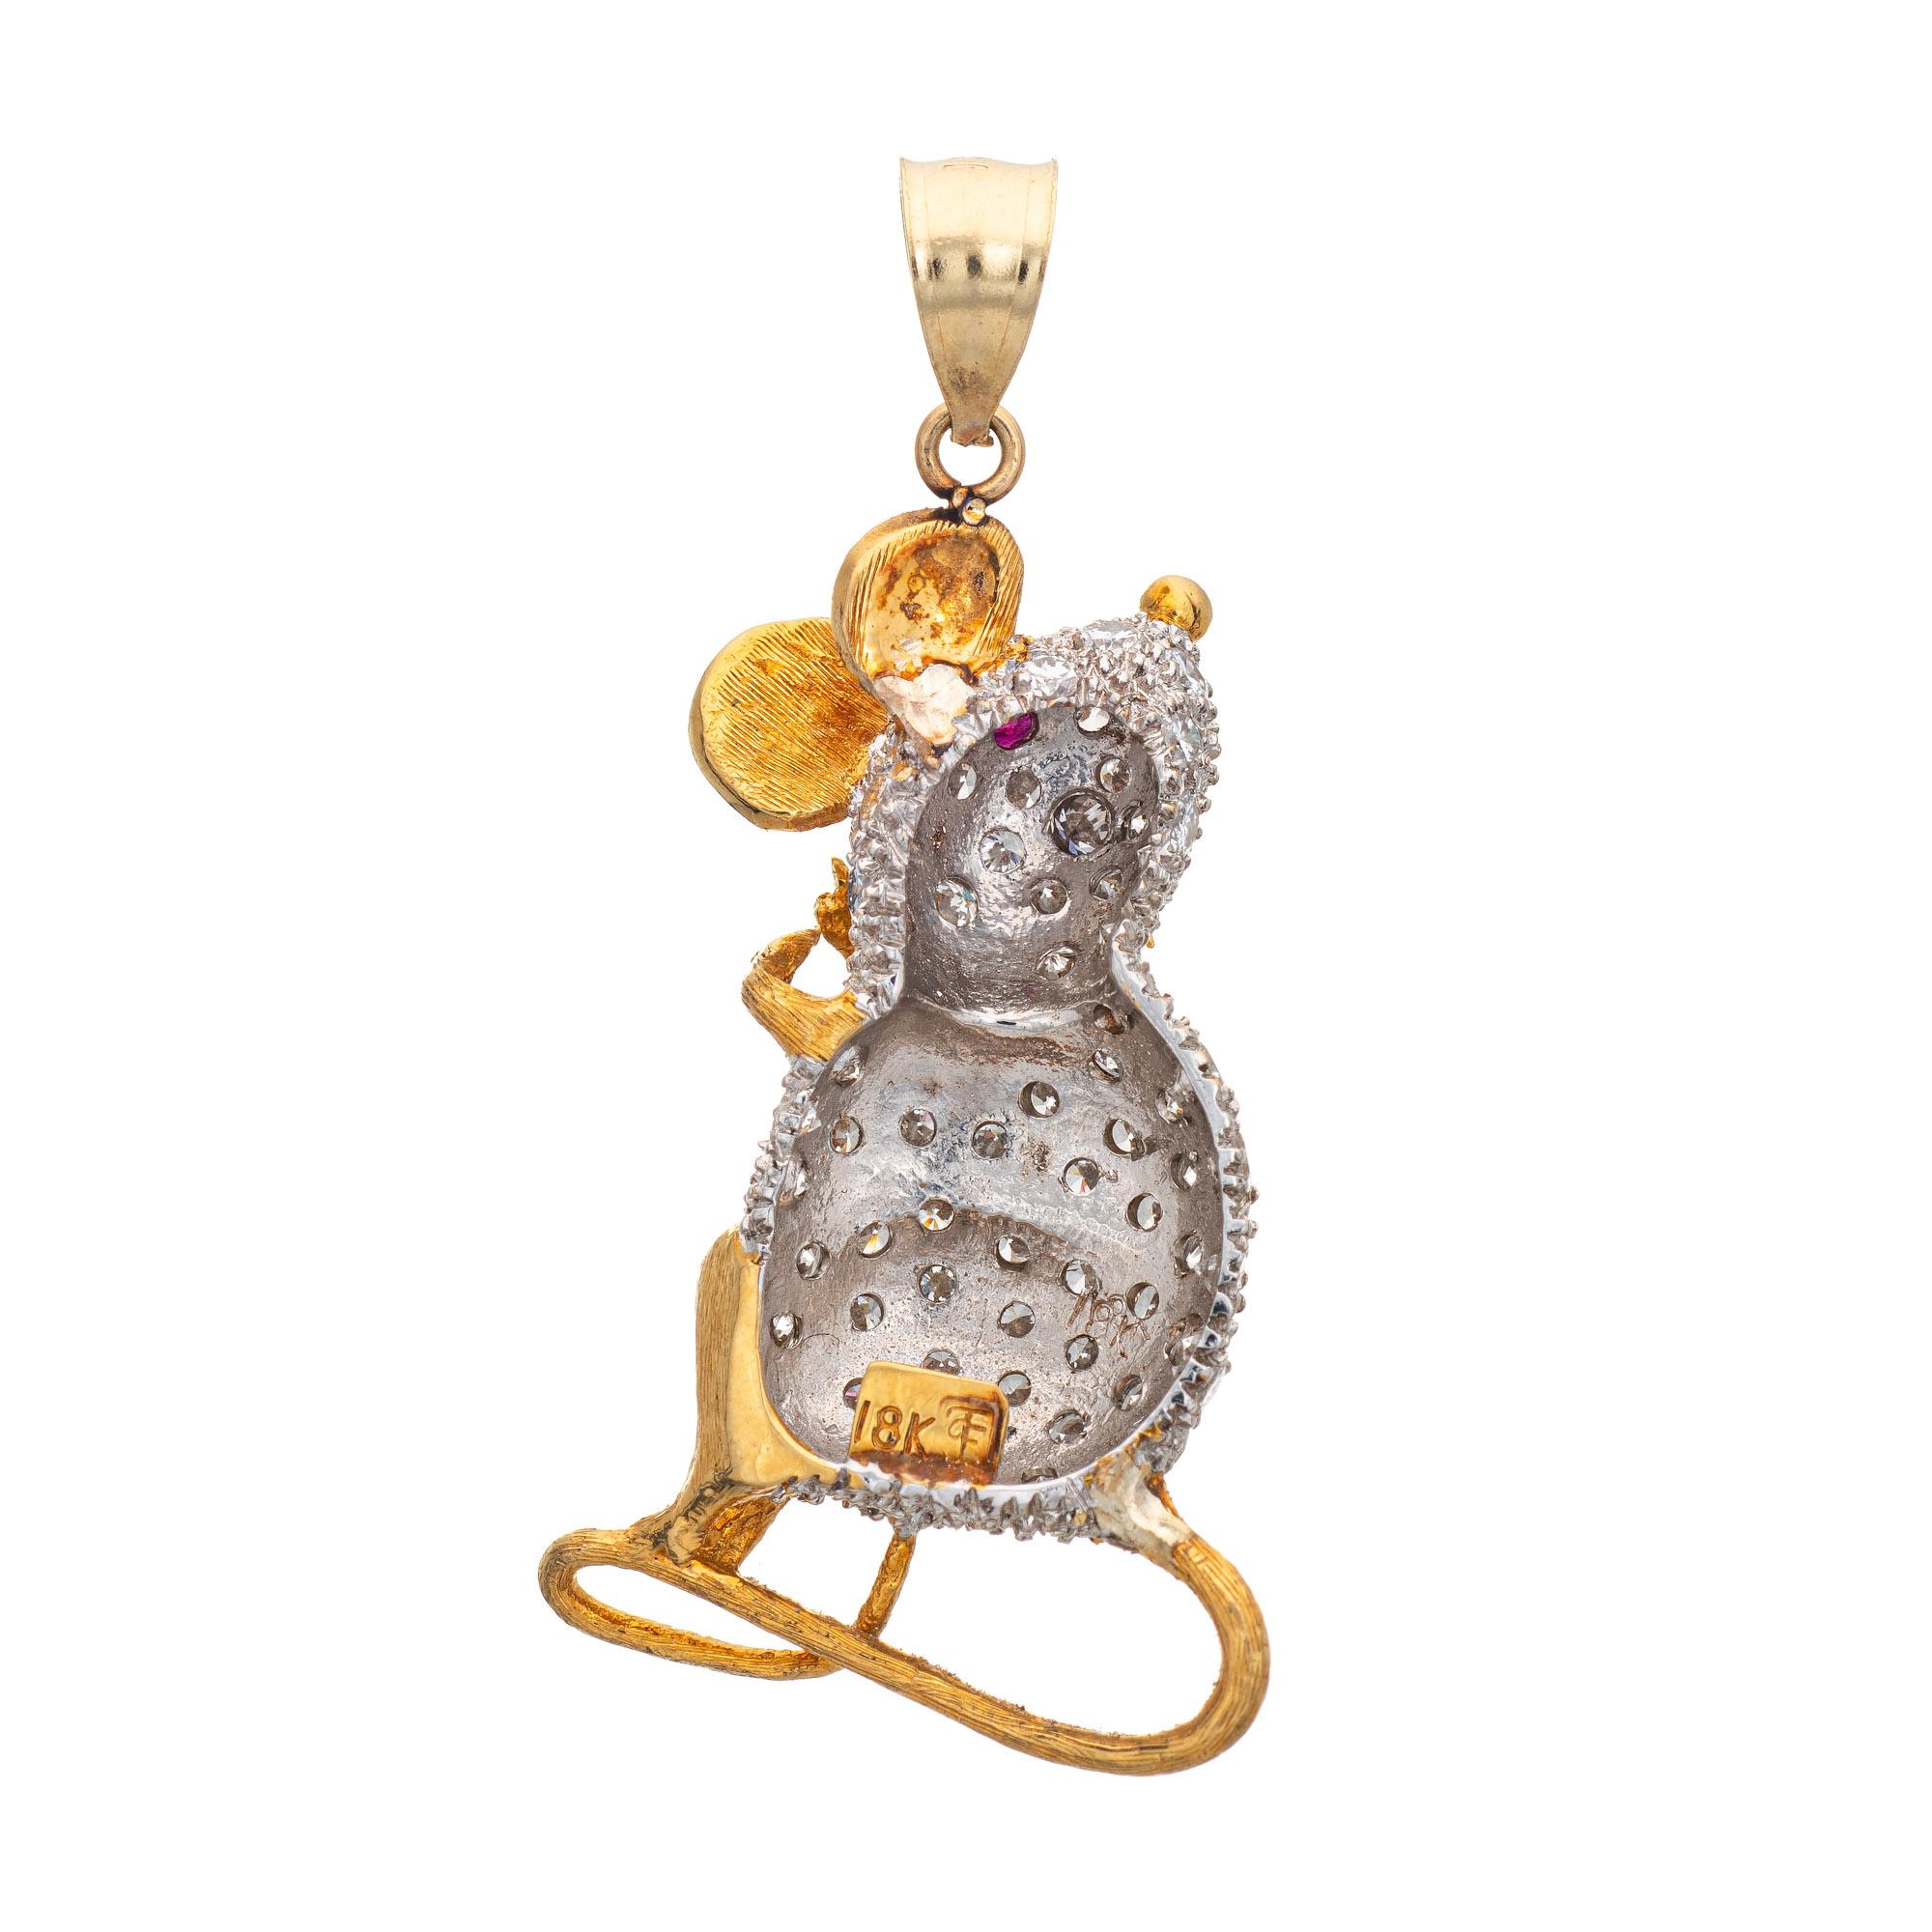 Finely detailed vintage diamond mouse pendant crafted in 18k yellow & white gold.  

Diamonds total an estimated 2 carats (estimated at F-G color and VS1-2 clarity). One estimated 0.02 carat ruby is set into the eye.

The finely detailed charm